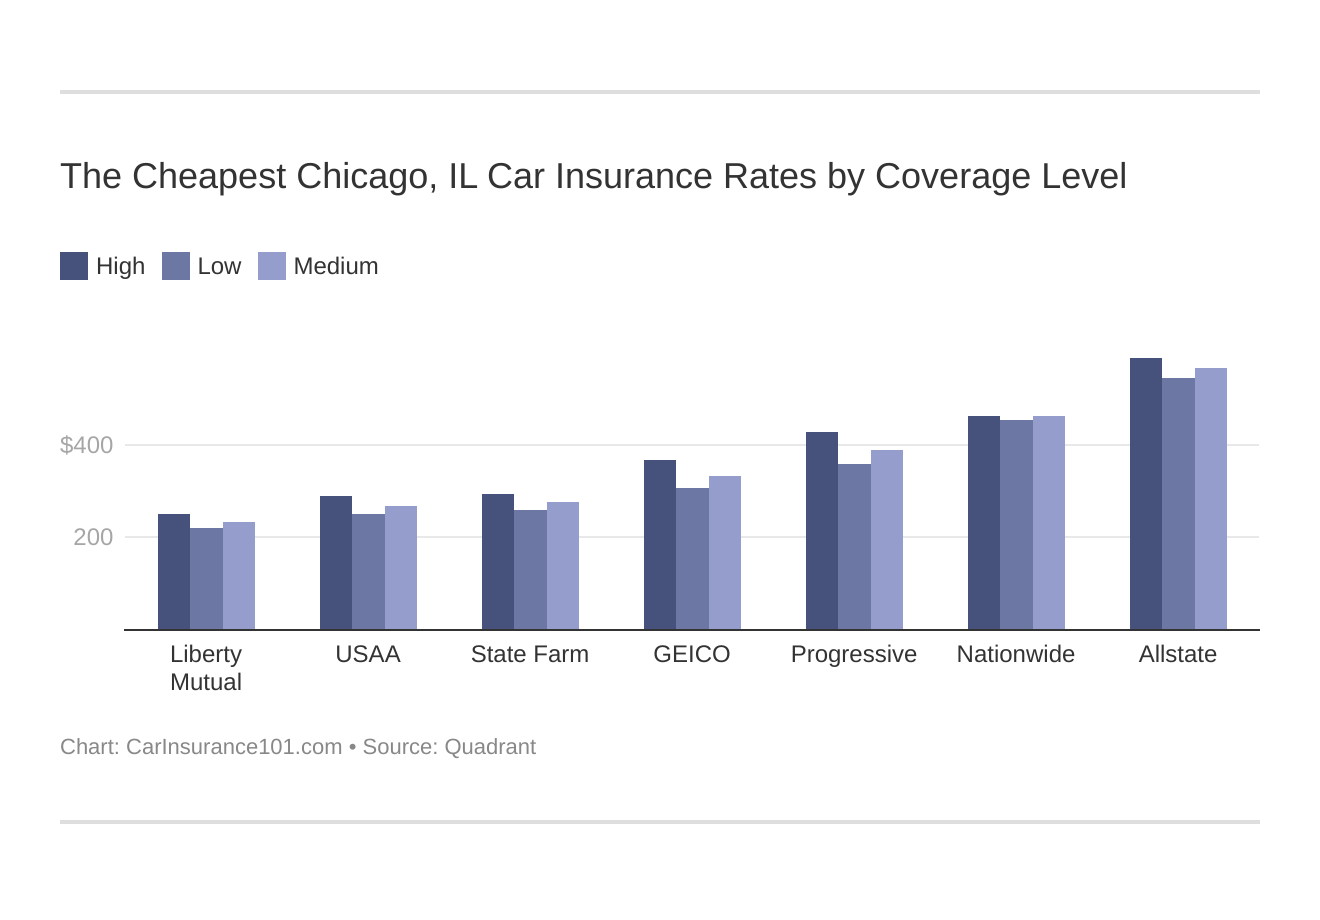 The Cheapest Chicago, IL Car Insurance Rates by Coverage Level